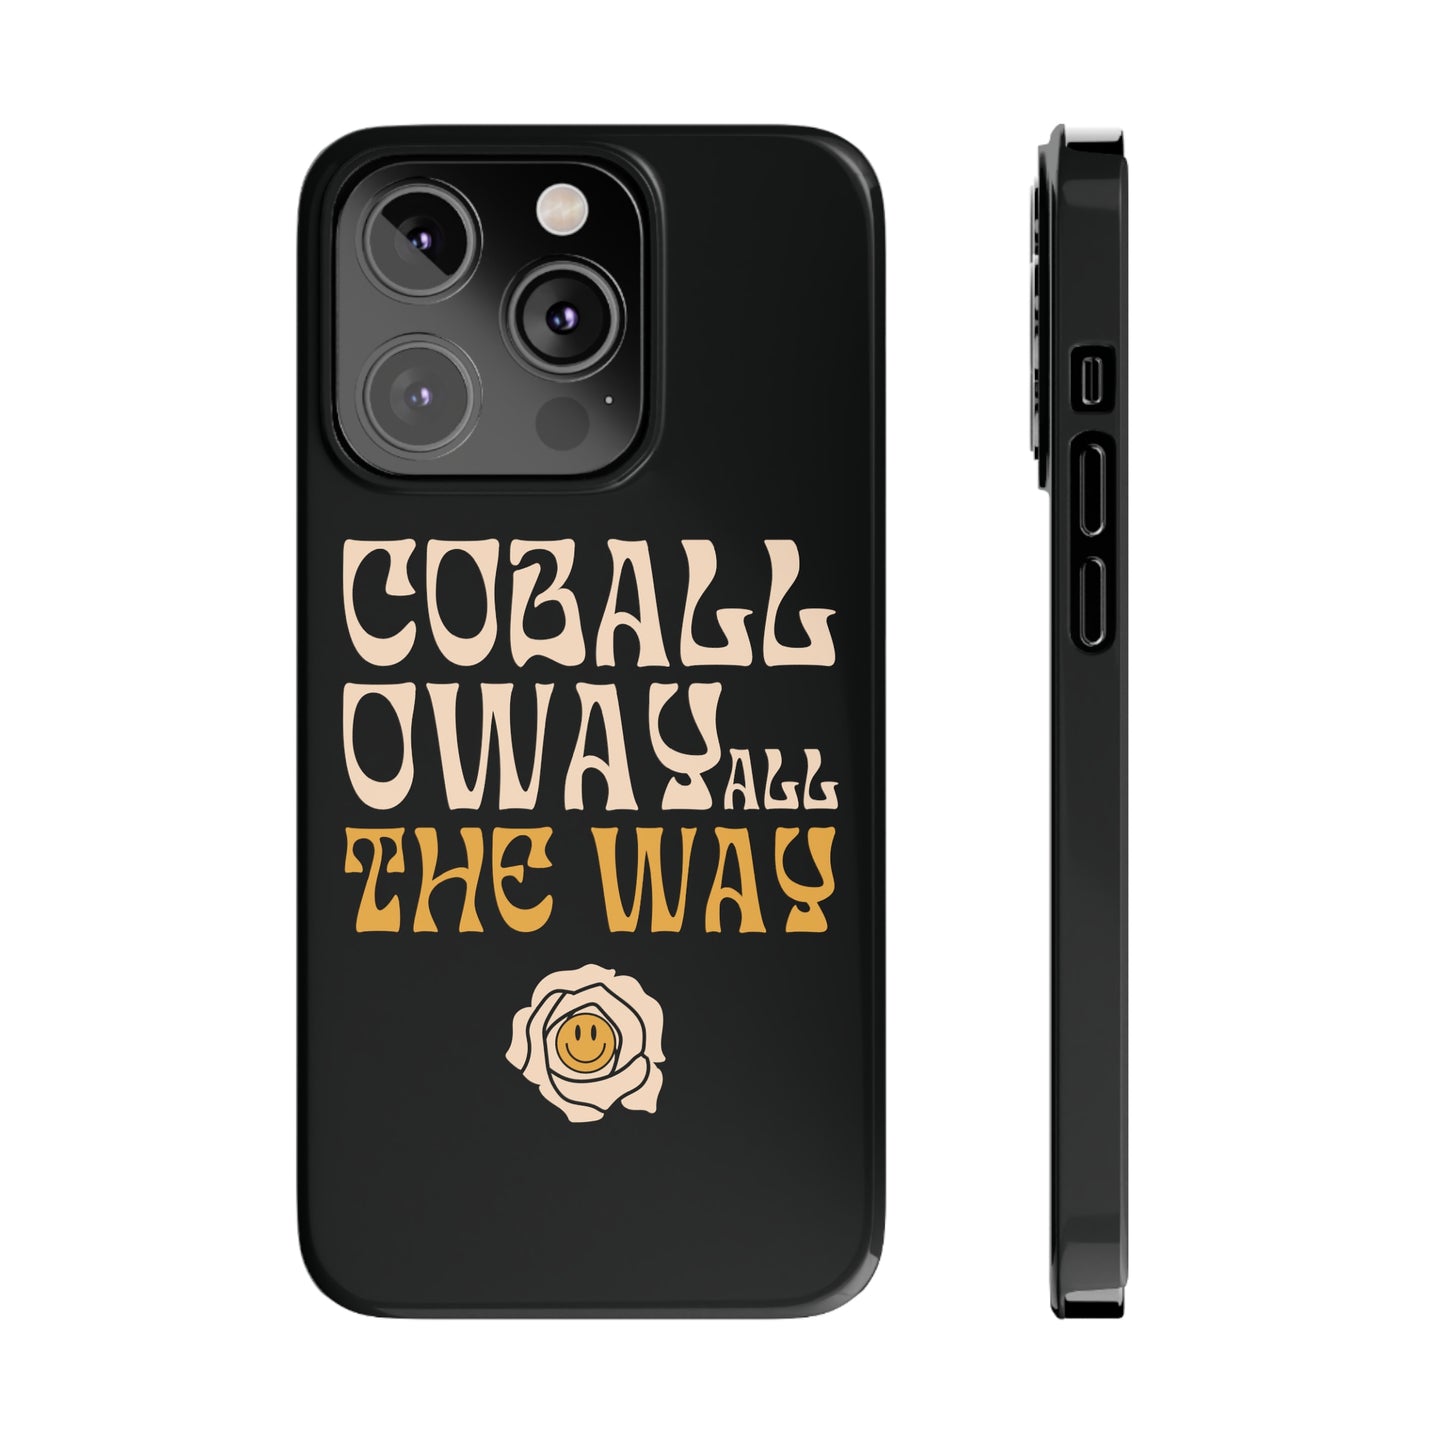 Coballoway All the Way Phone Cases